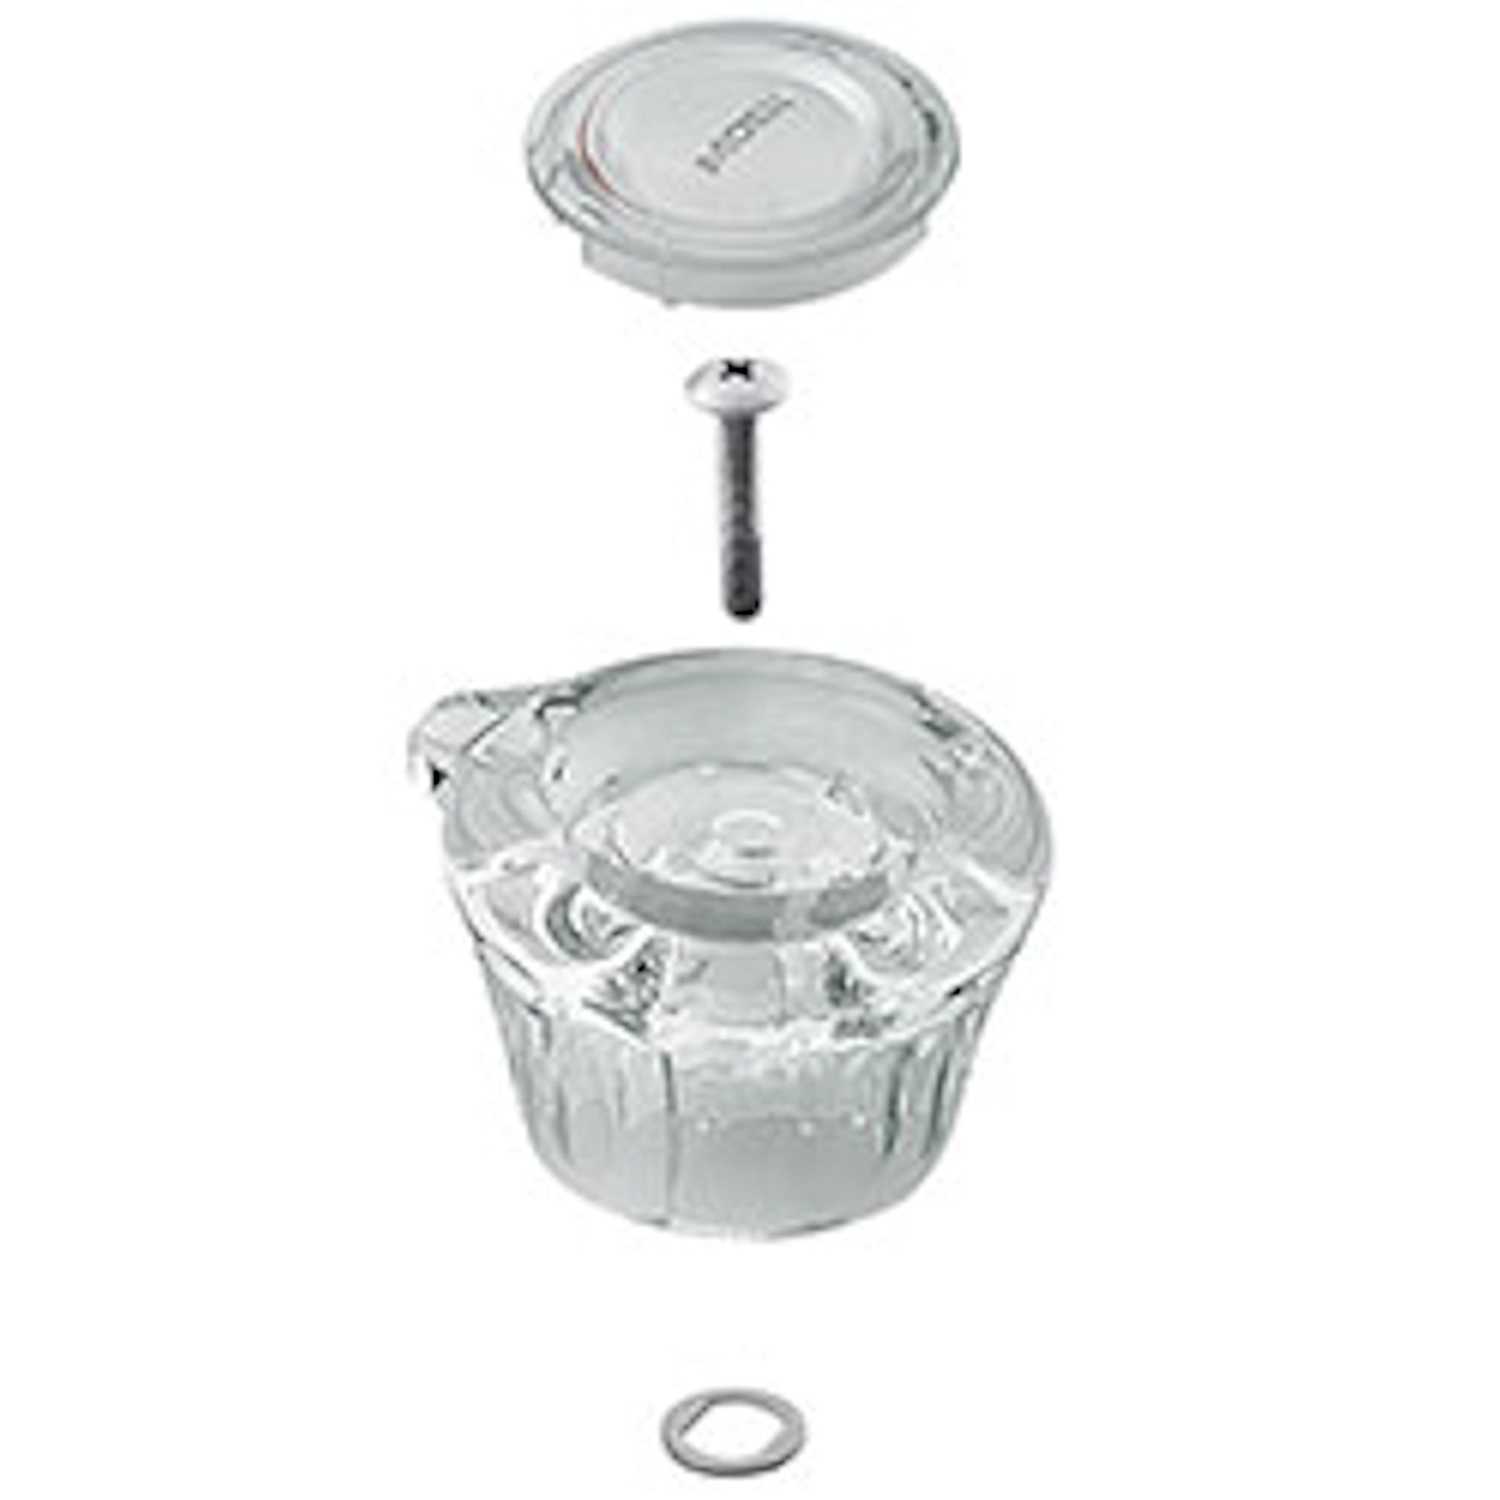 Moen Knob Clear Acrylic Single Tub and Shower Handle For